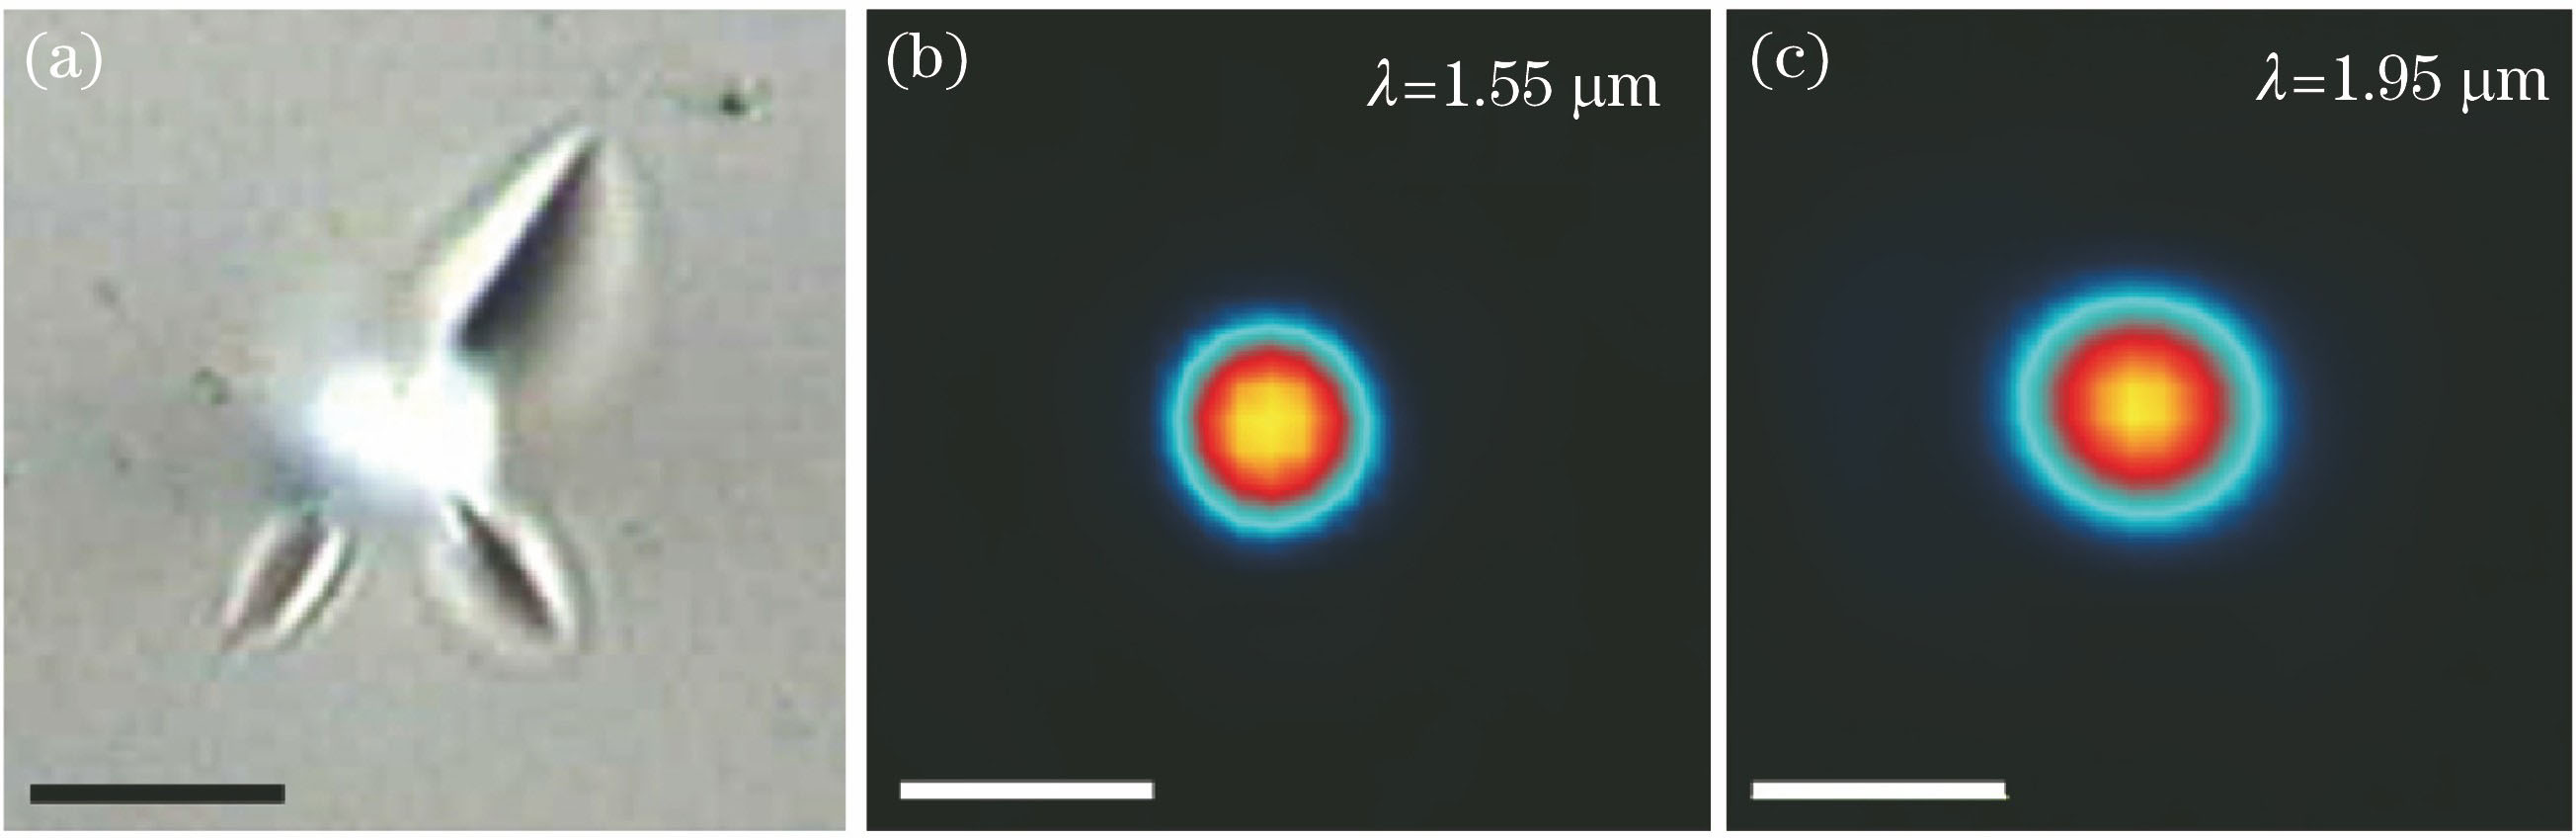 Waveguides fabricated by multiscan technique in Ho∶YAG ceramics. (a) Microscopic image of end-face after multiple scanning for Ho∶YAG waveguide; (b)(c) mode profiles at wavelengths of 1.55 μm and 1.95 μm. Scale bar is 10 μm[62]